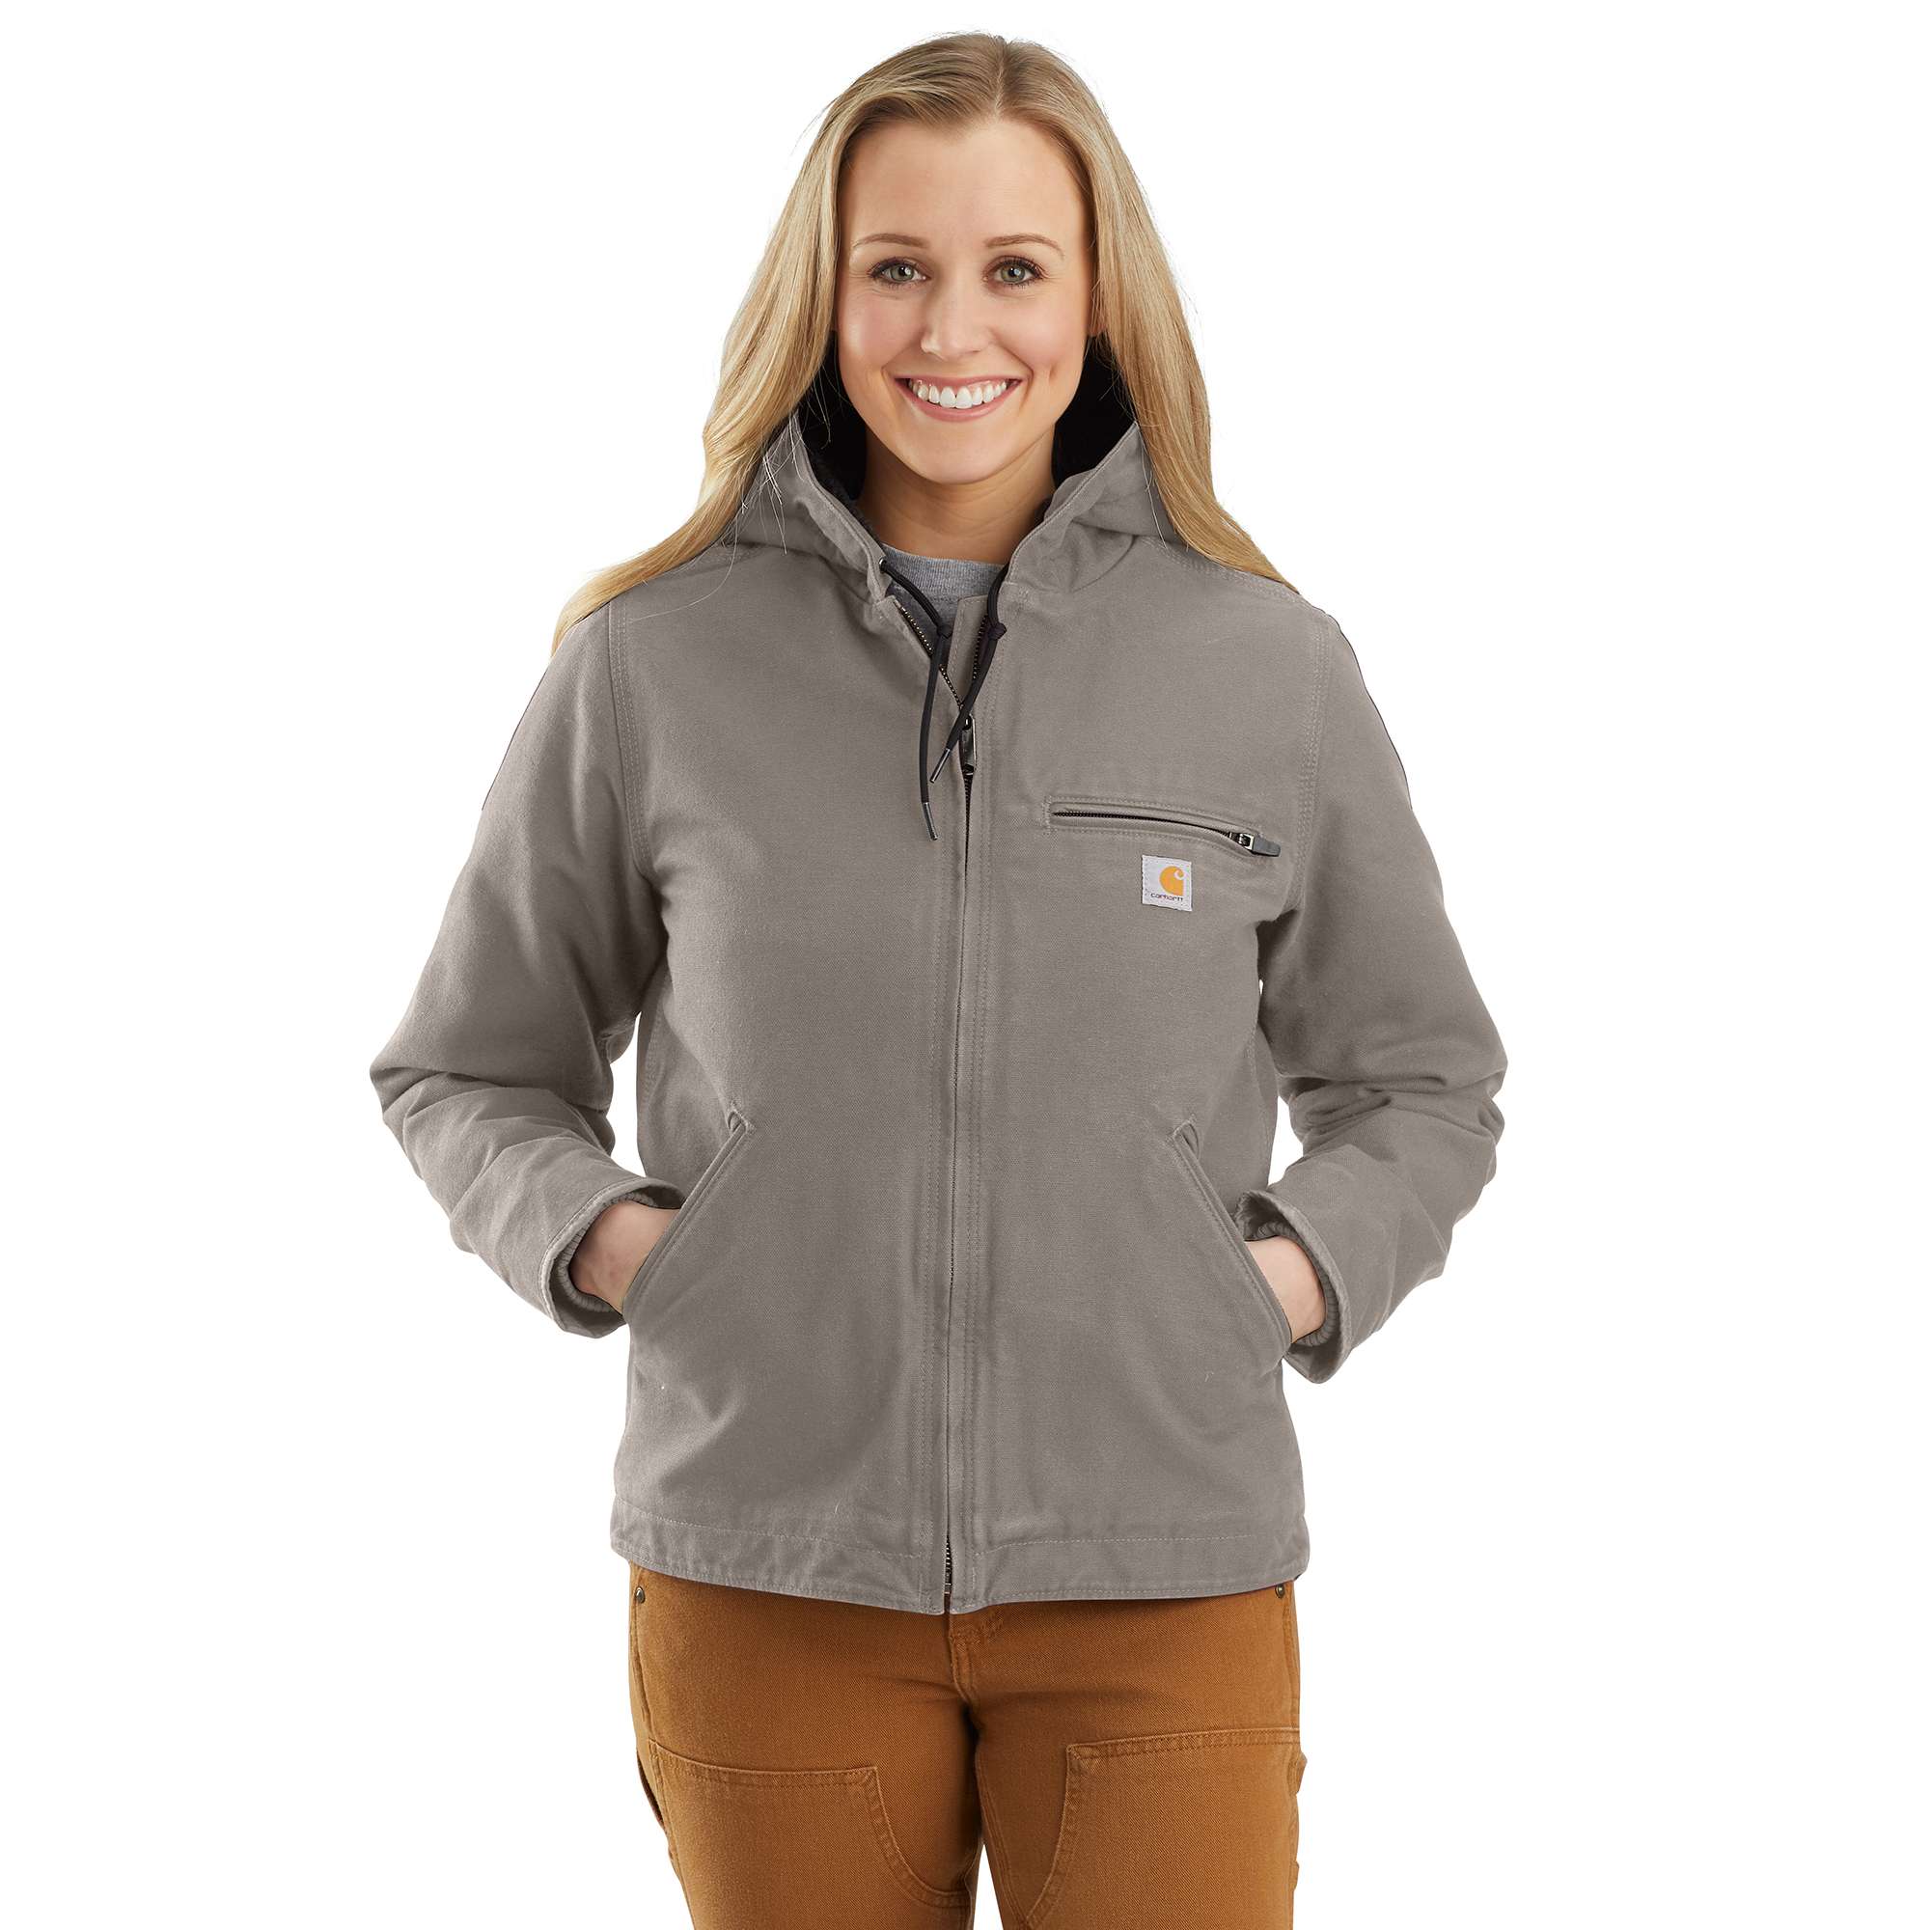 Women's Sherpa Lined Jacket - Loose Fit - Washed Duck - 3 Warmest Rating